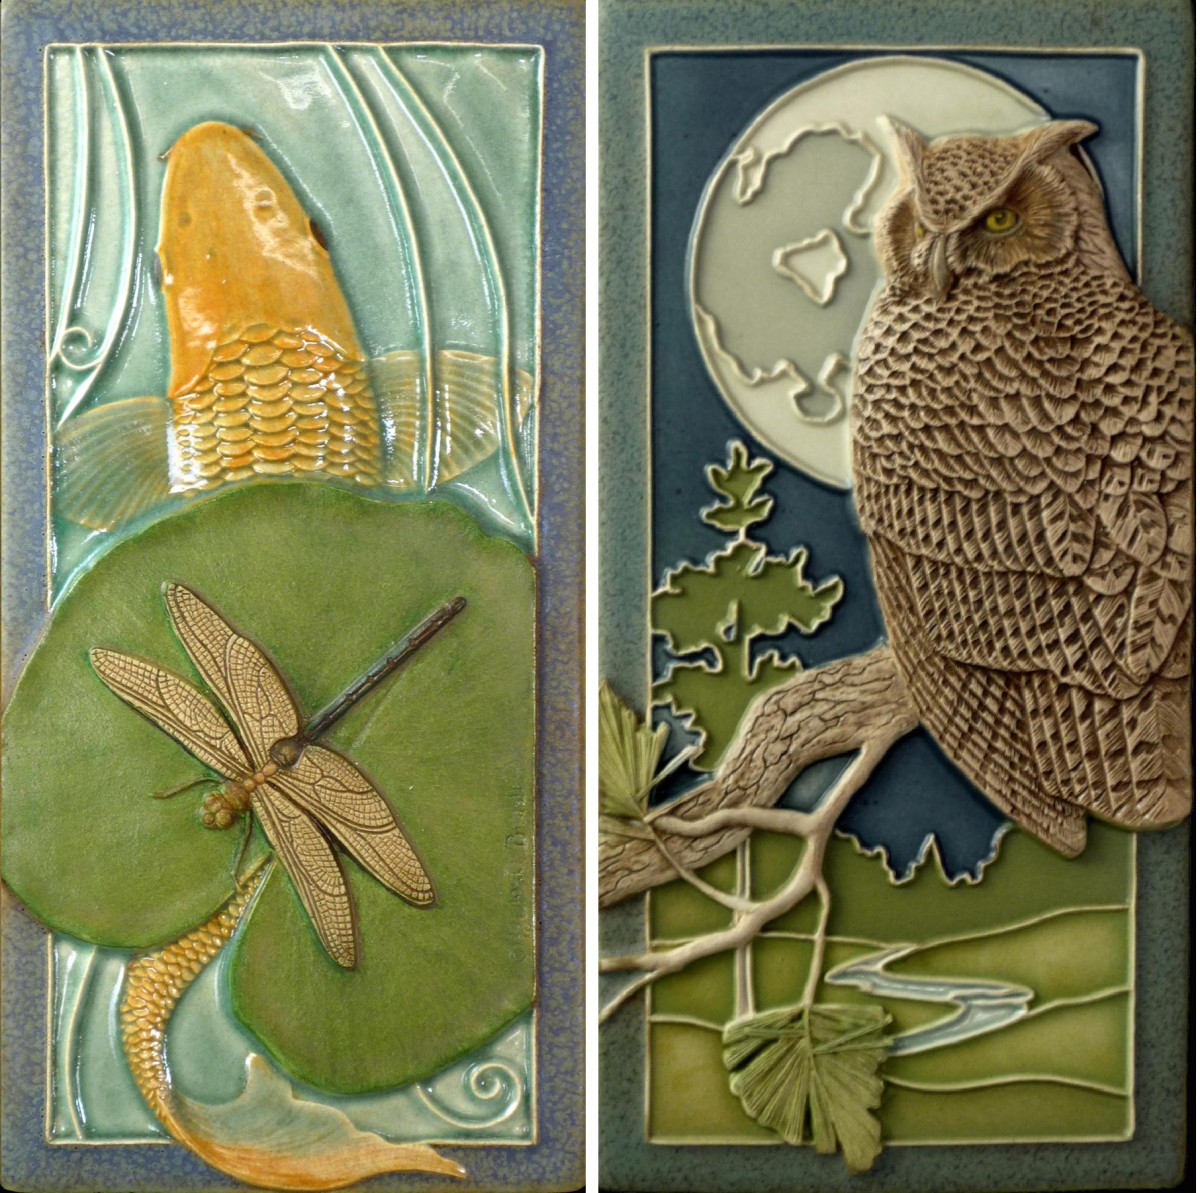 Koi and Dragonfly tile and Night Owl tile by Medicine Bluff Studios.